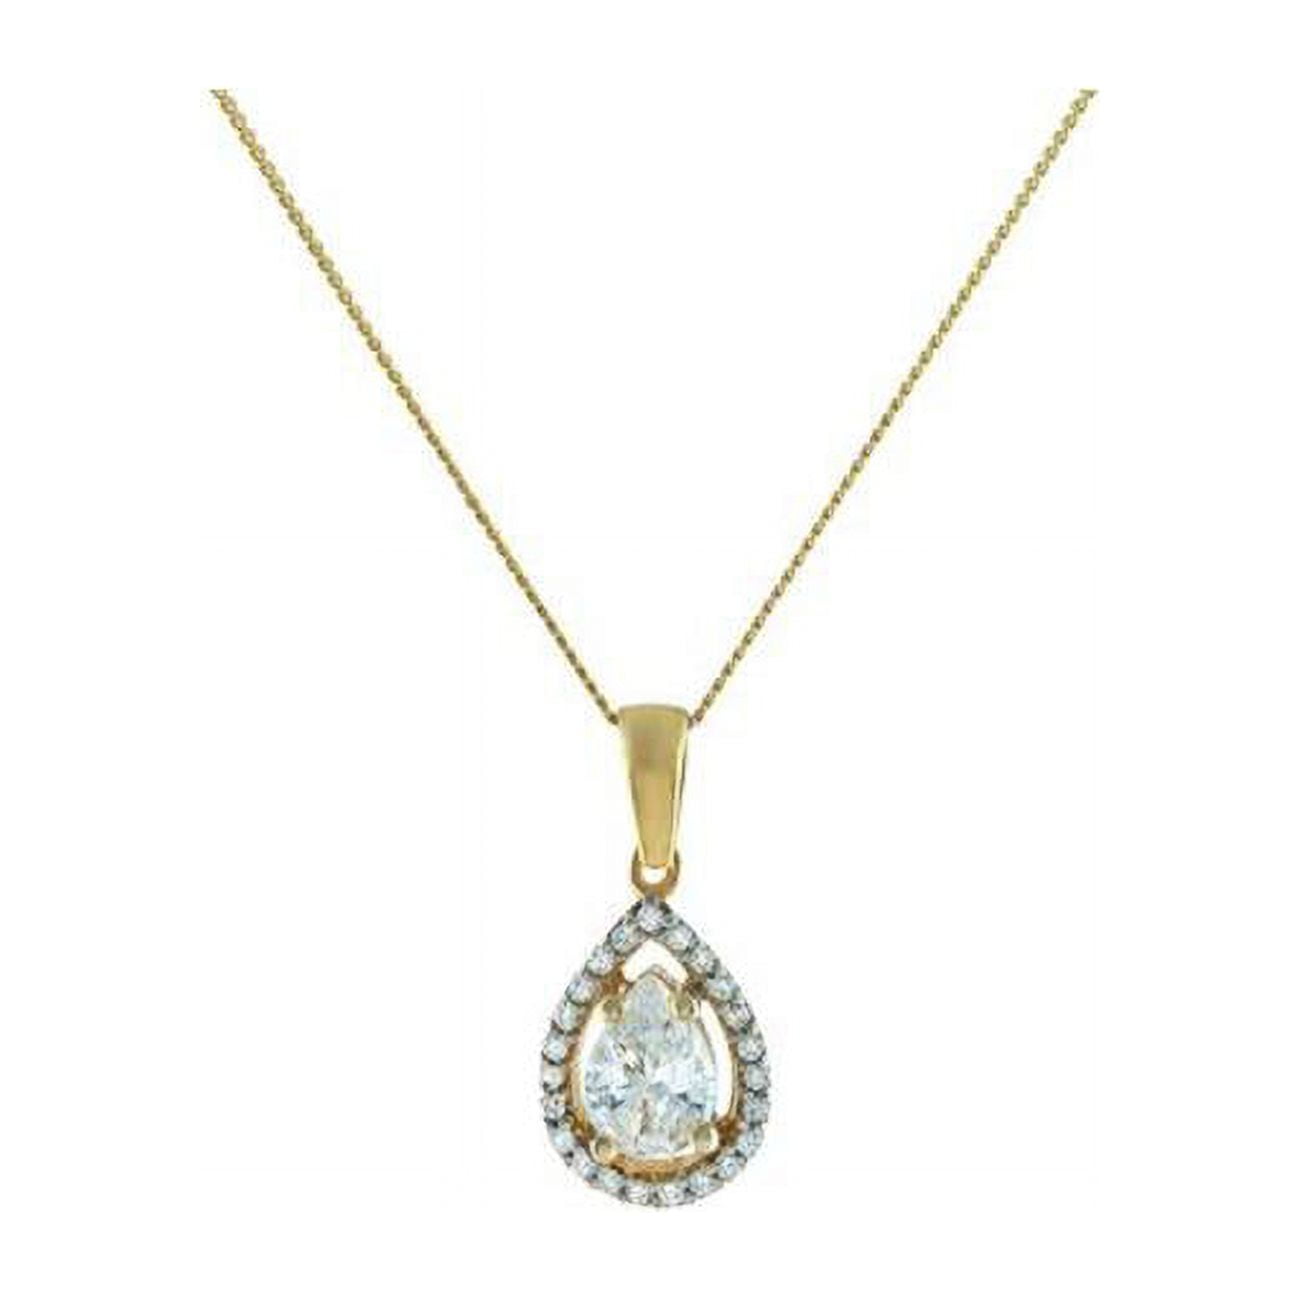 411421g Gold Plated Sterling Silver Antique Marquise Cubic Zirconia Charm Chain Necklace